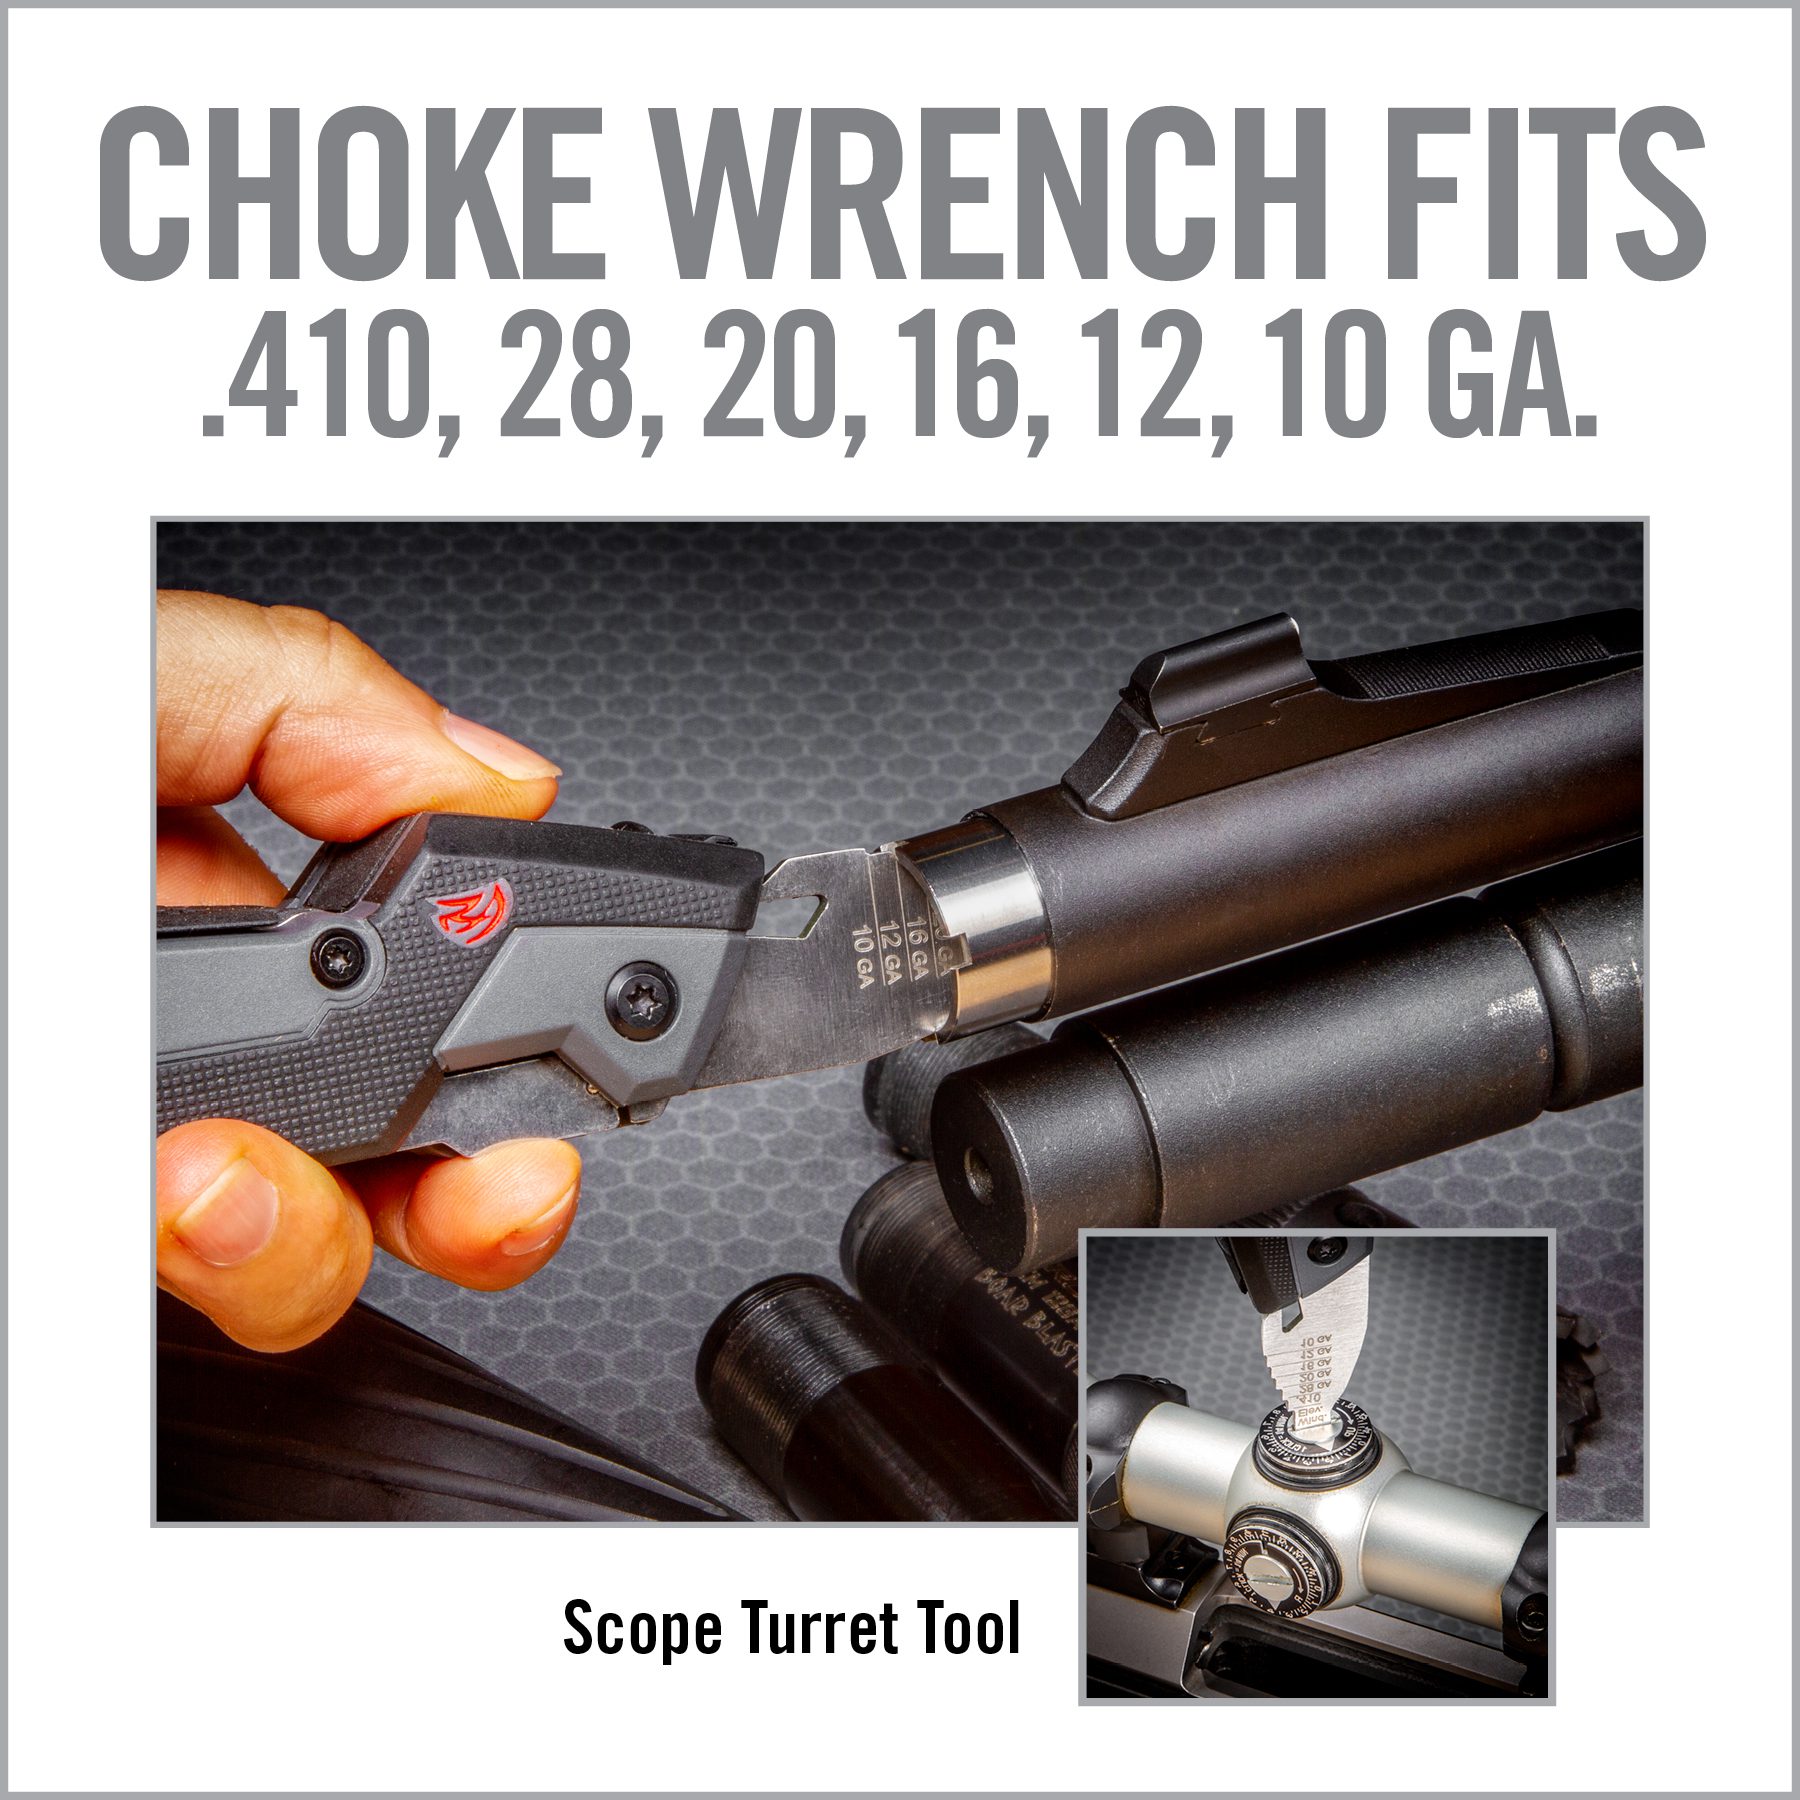 a manual for how to use a knife wrench